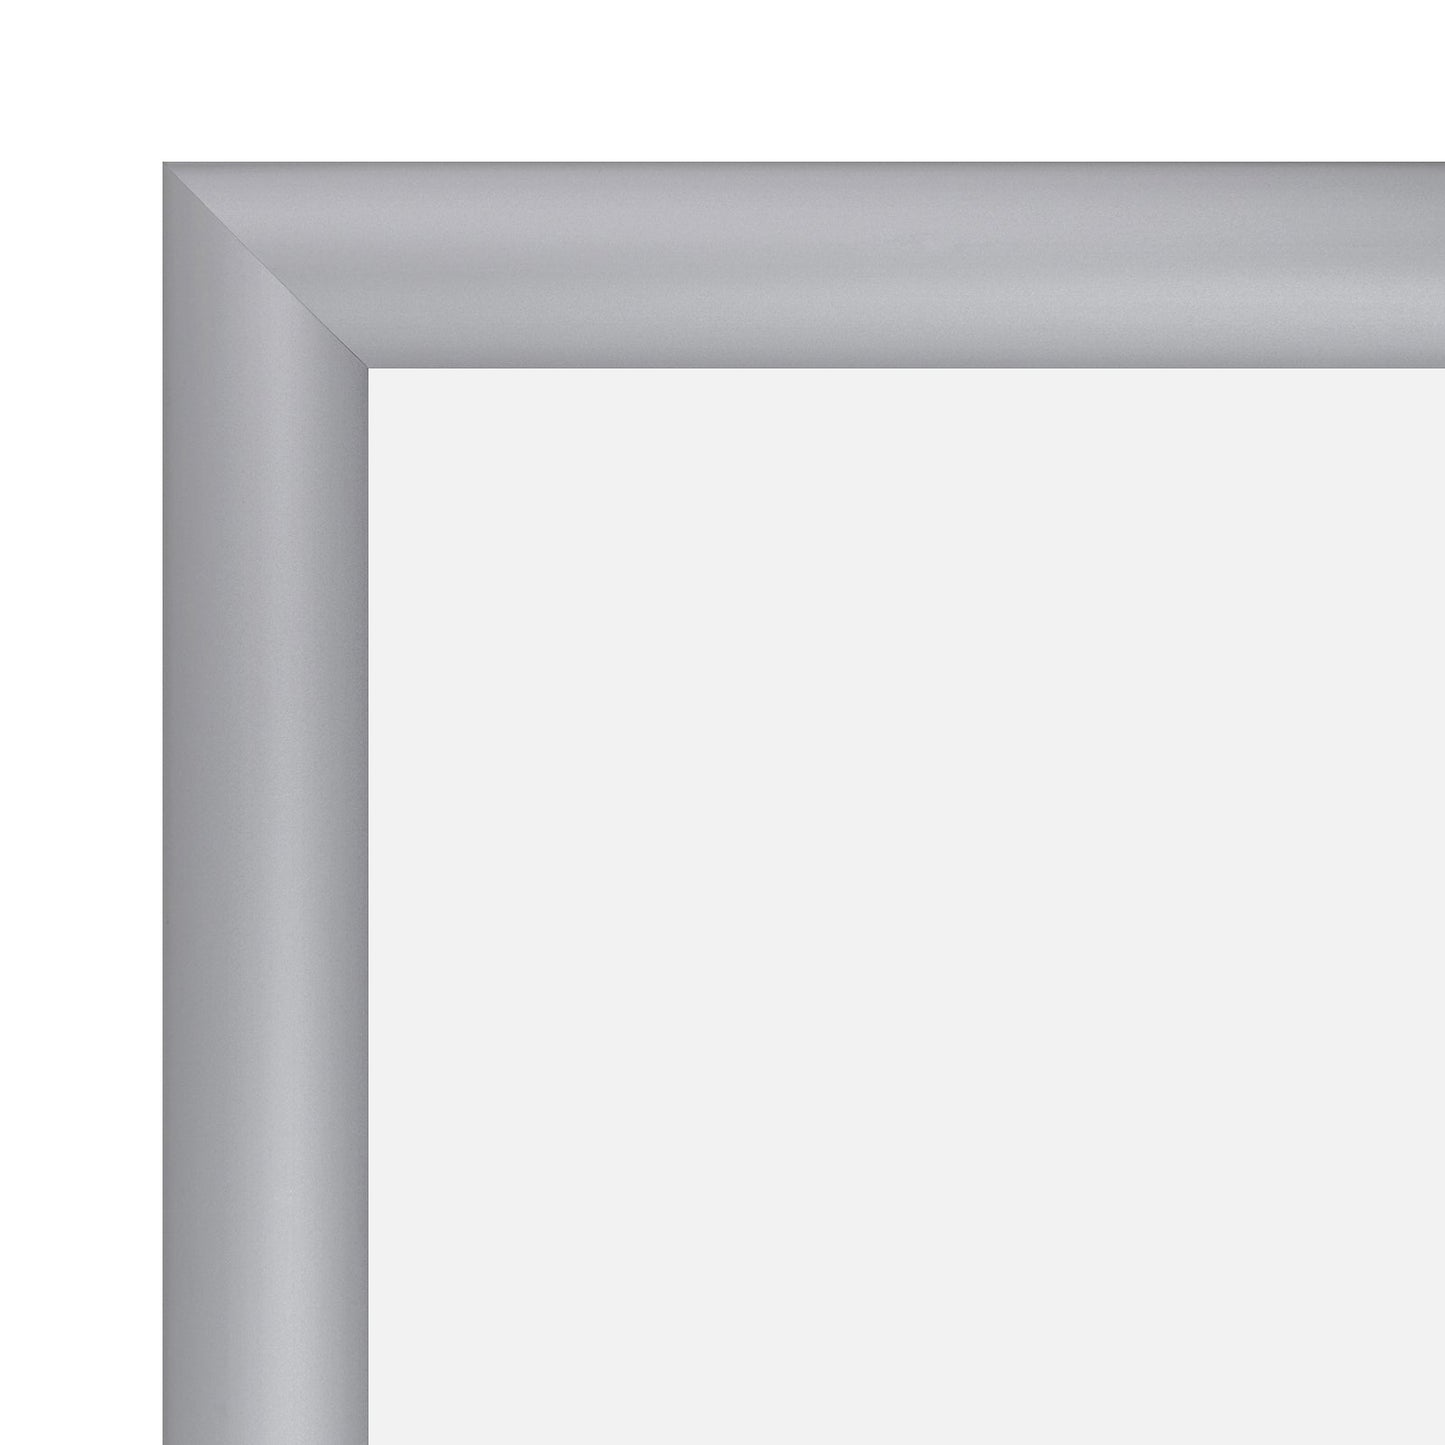 8x10 TRADEframe Silver Snap Frame 8x10 - 1.2 inch profile - Snap Frames Direct